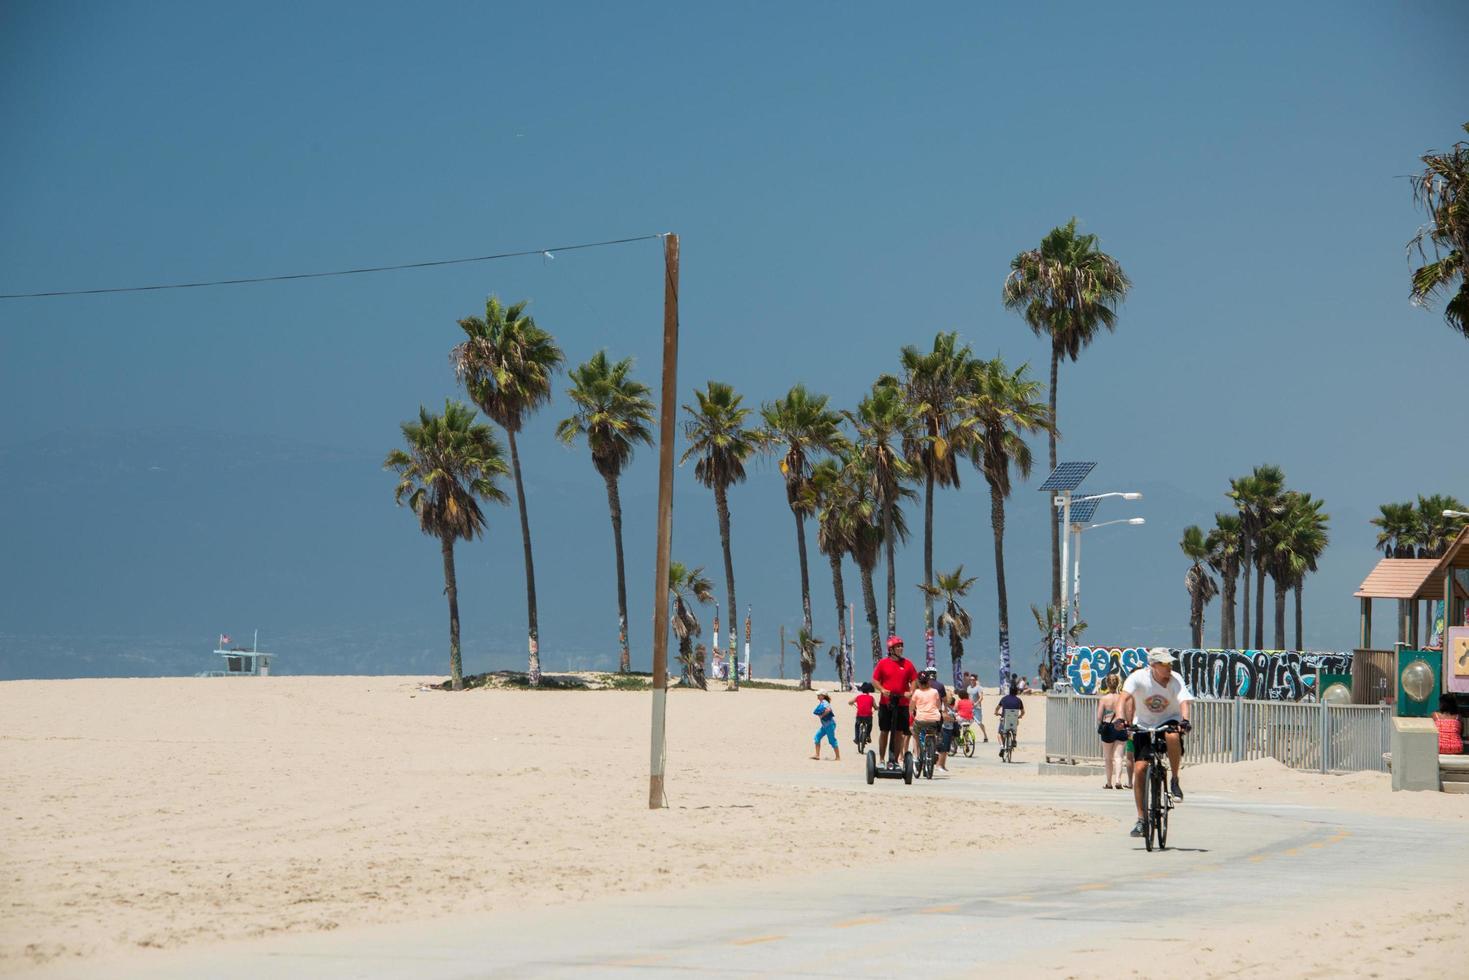 LOS ANGELES, USA - AUGUST 5, 2014 - people in venice beach landscape photo